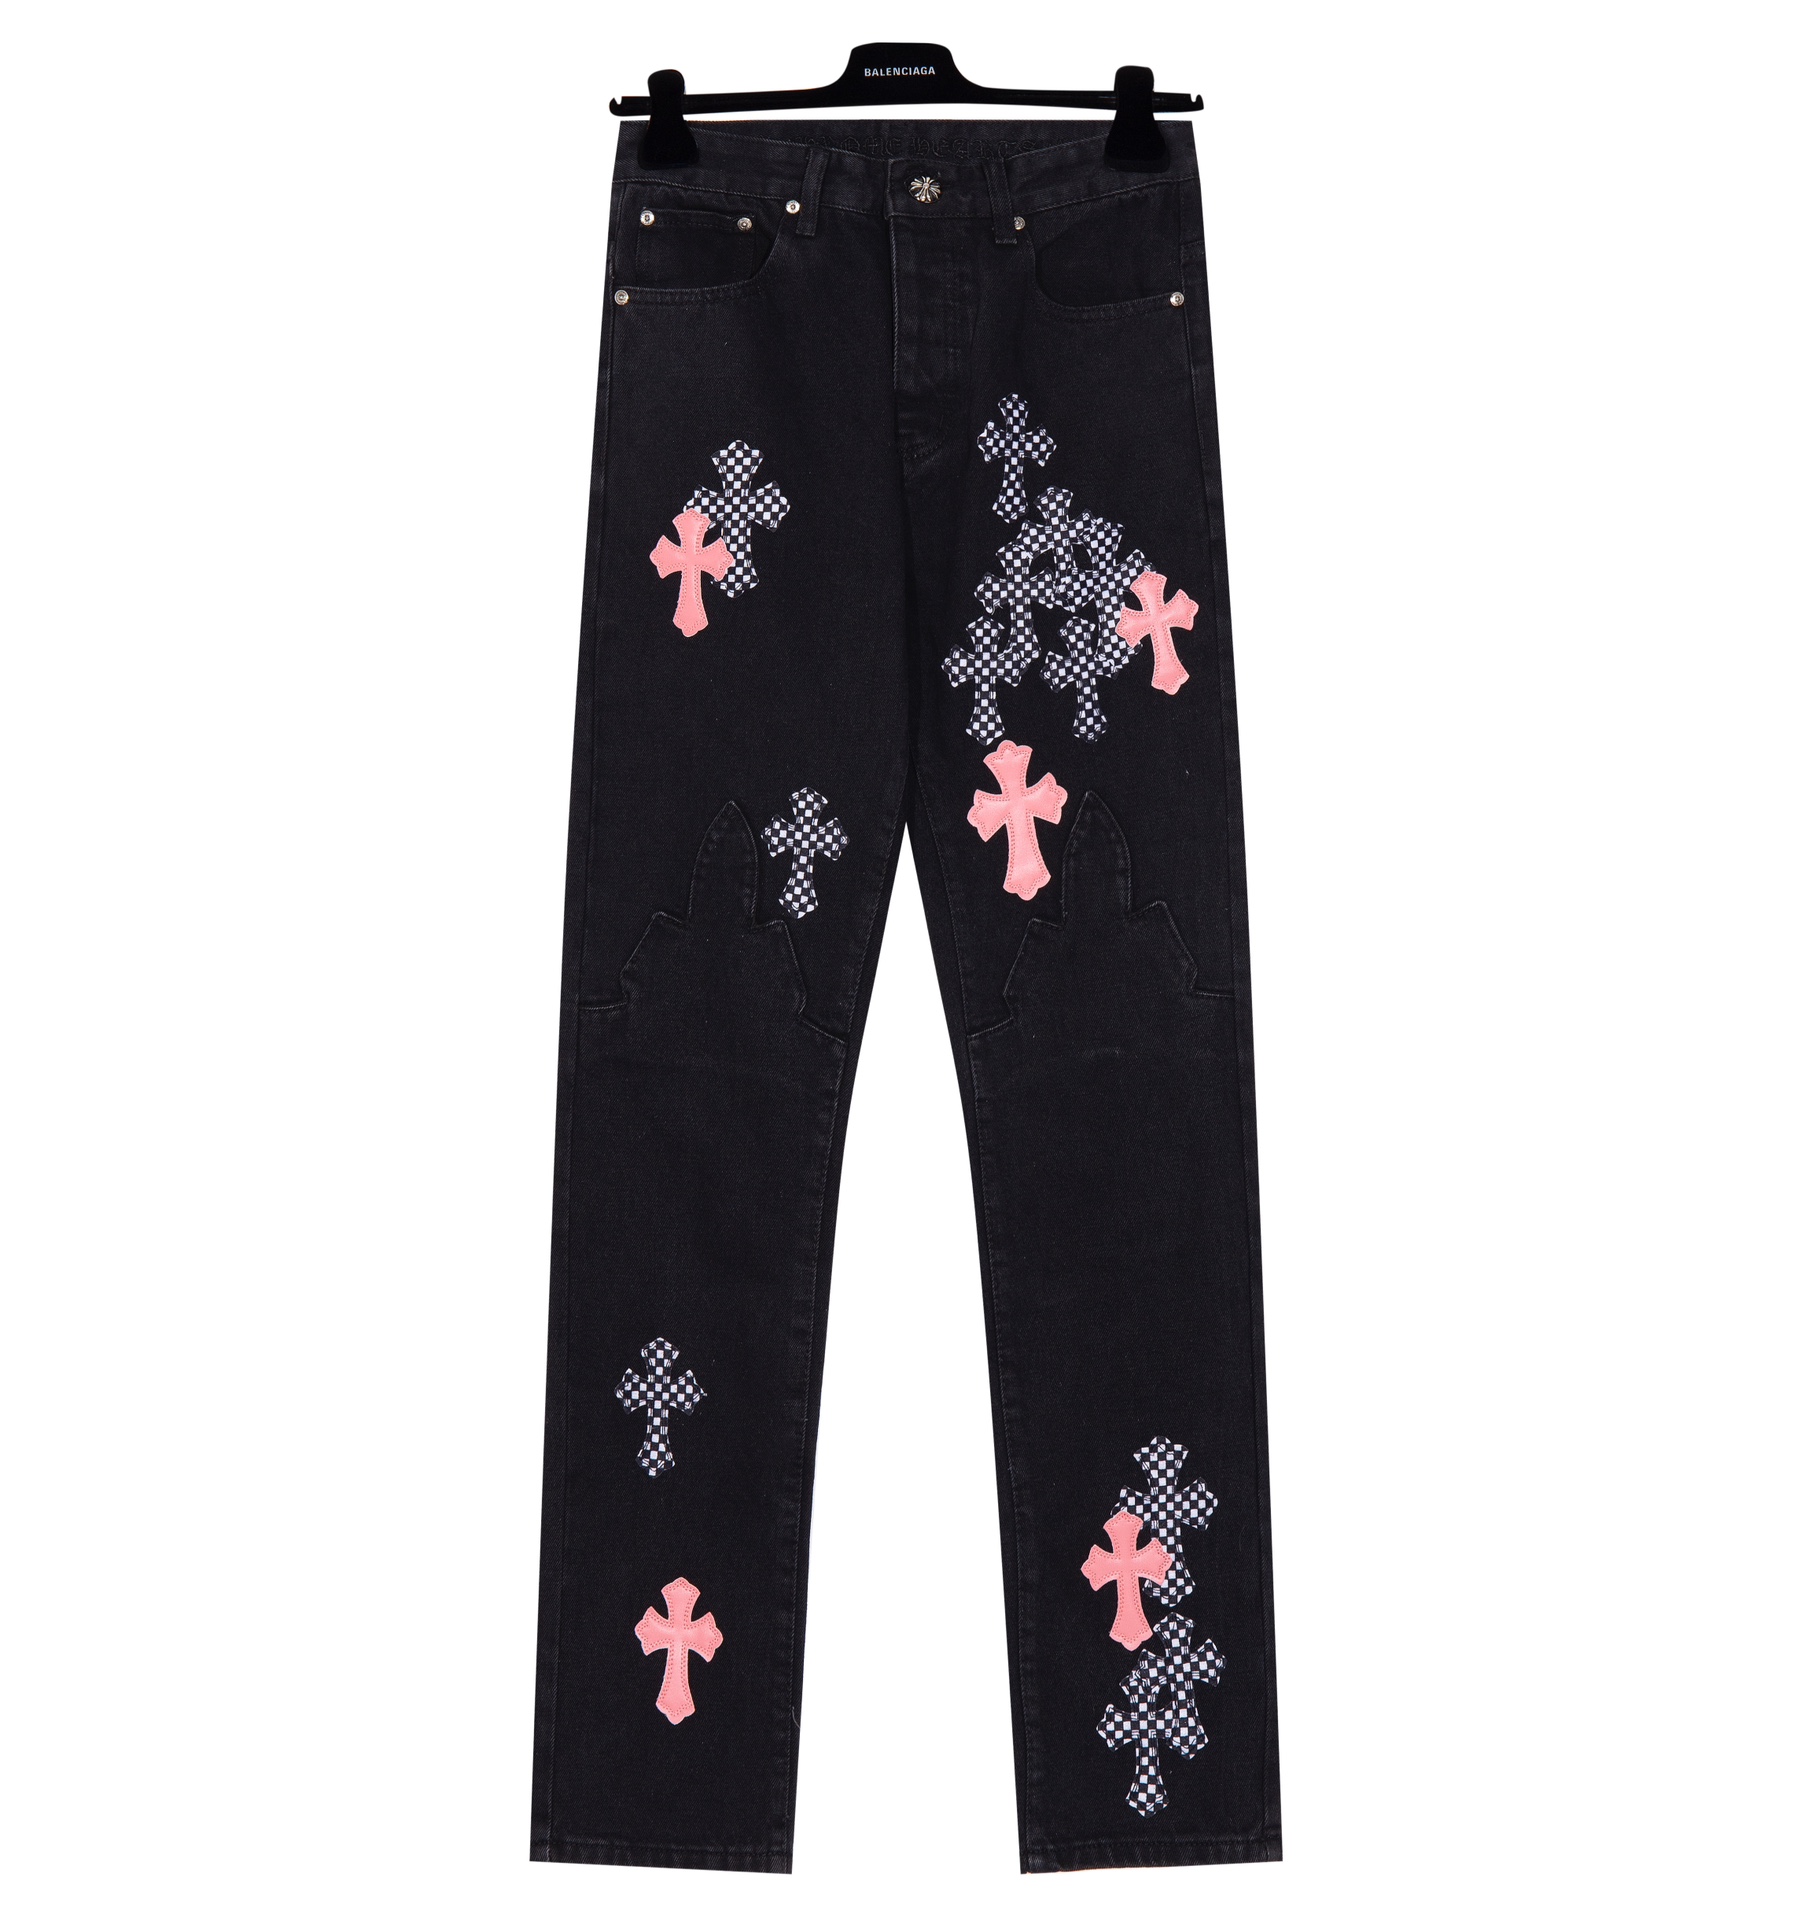 Chrome Hearts Clothing Jeans Pants & Trousers Best Quality Fake
 Black Pink Unisex Canvas